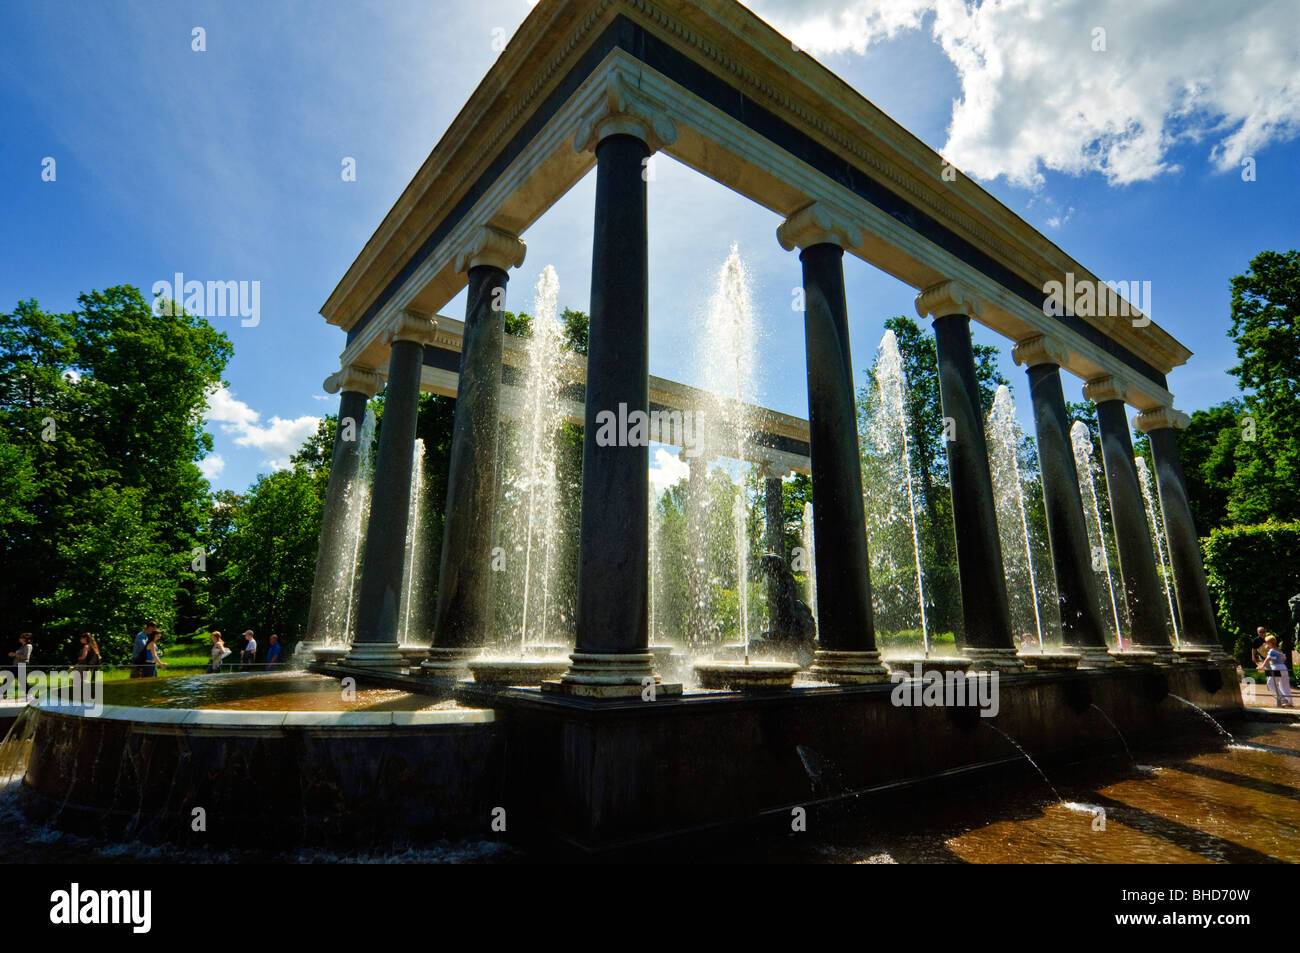 Fountains in the grounds of the former Imperial palace of Peterhof (Petrodvorets), St Petersburg, Russia Stock Photo